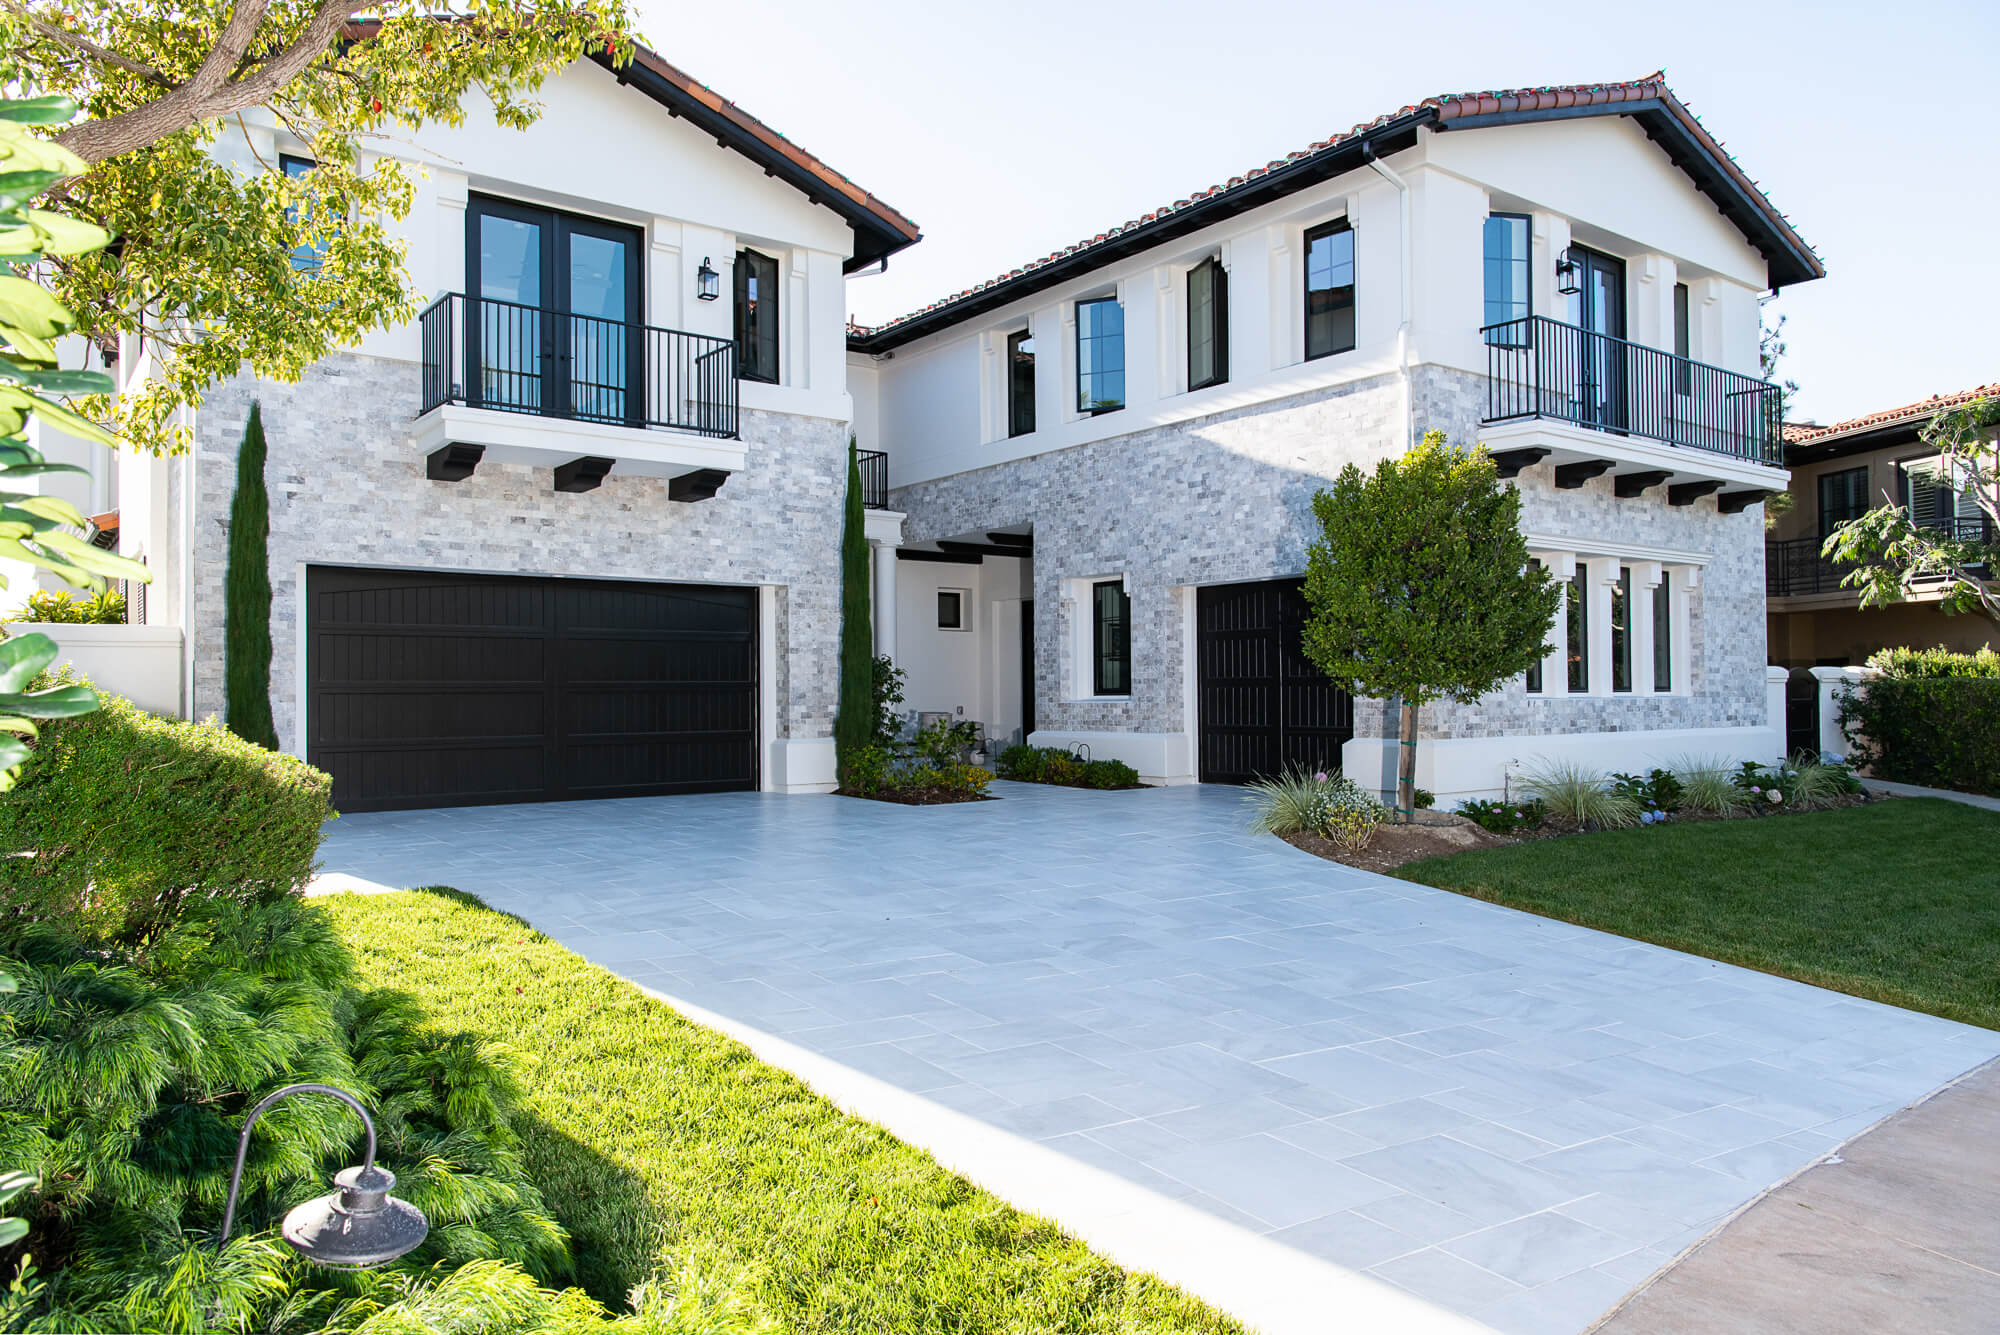 new-driveway-in-porcelain-pavers-versailles-pattern - Home renovations that actually pay off